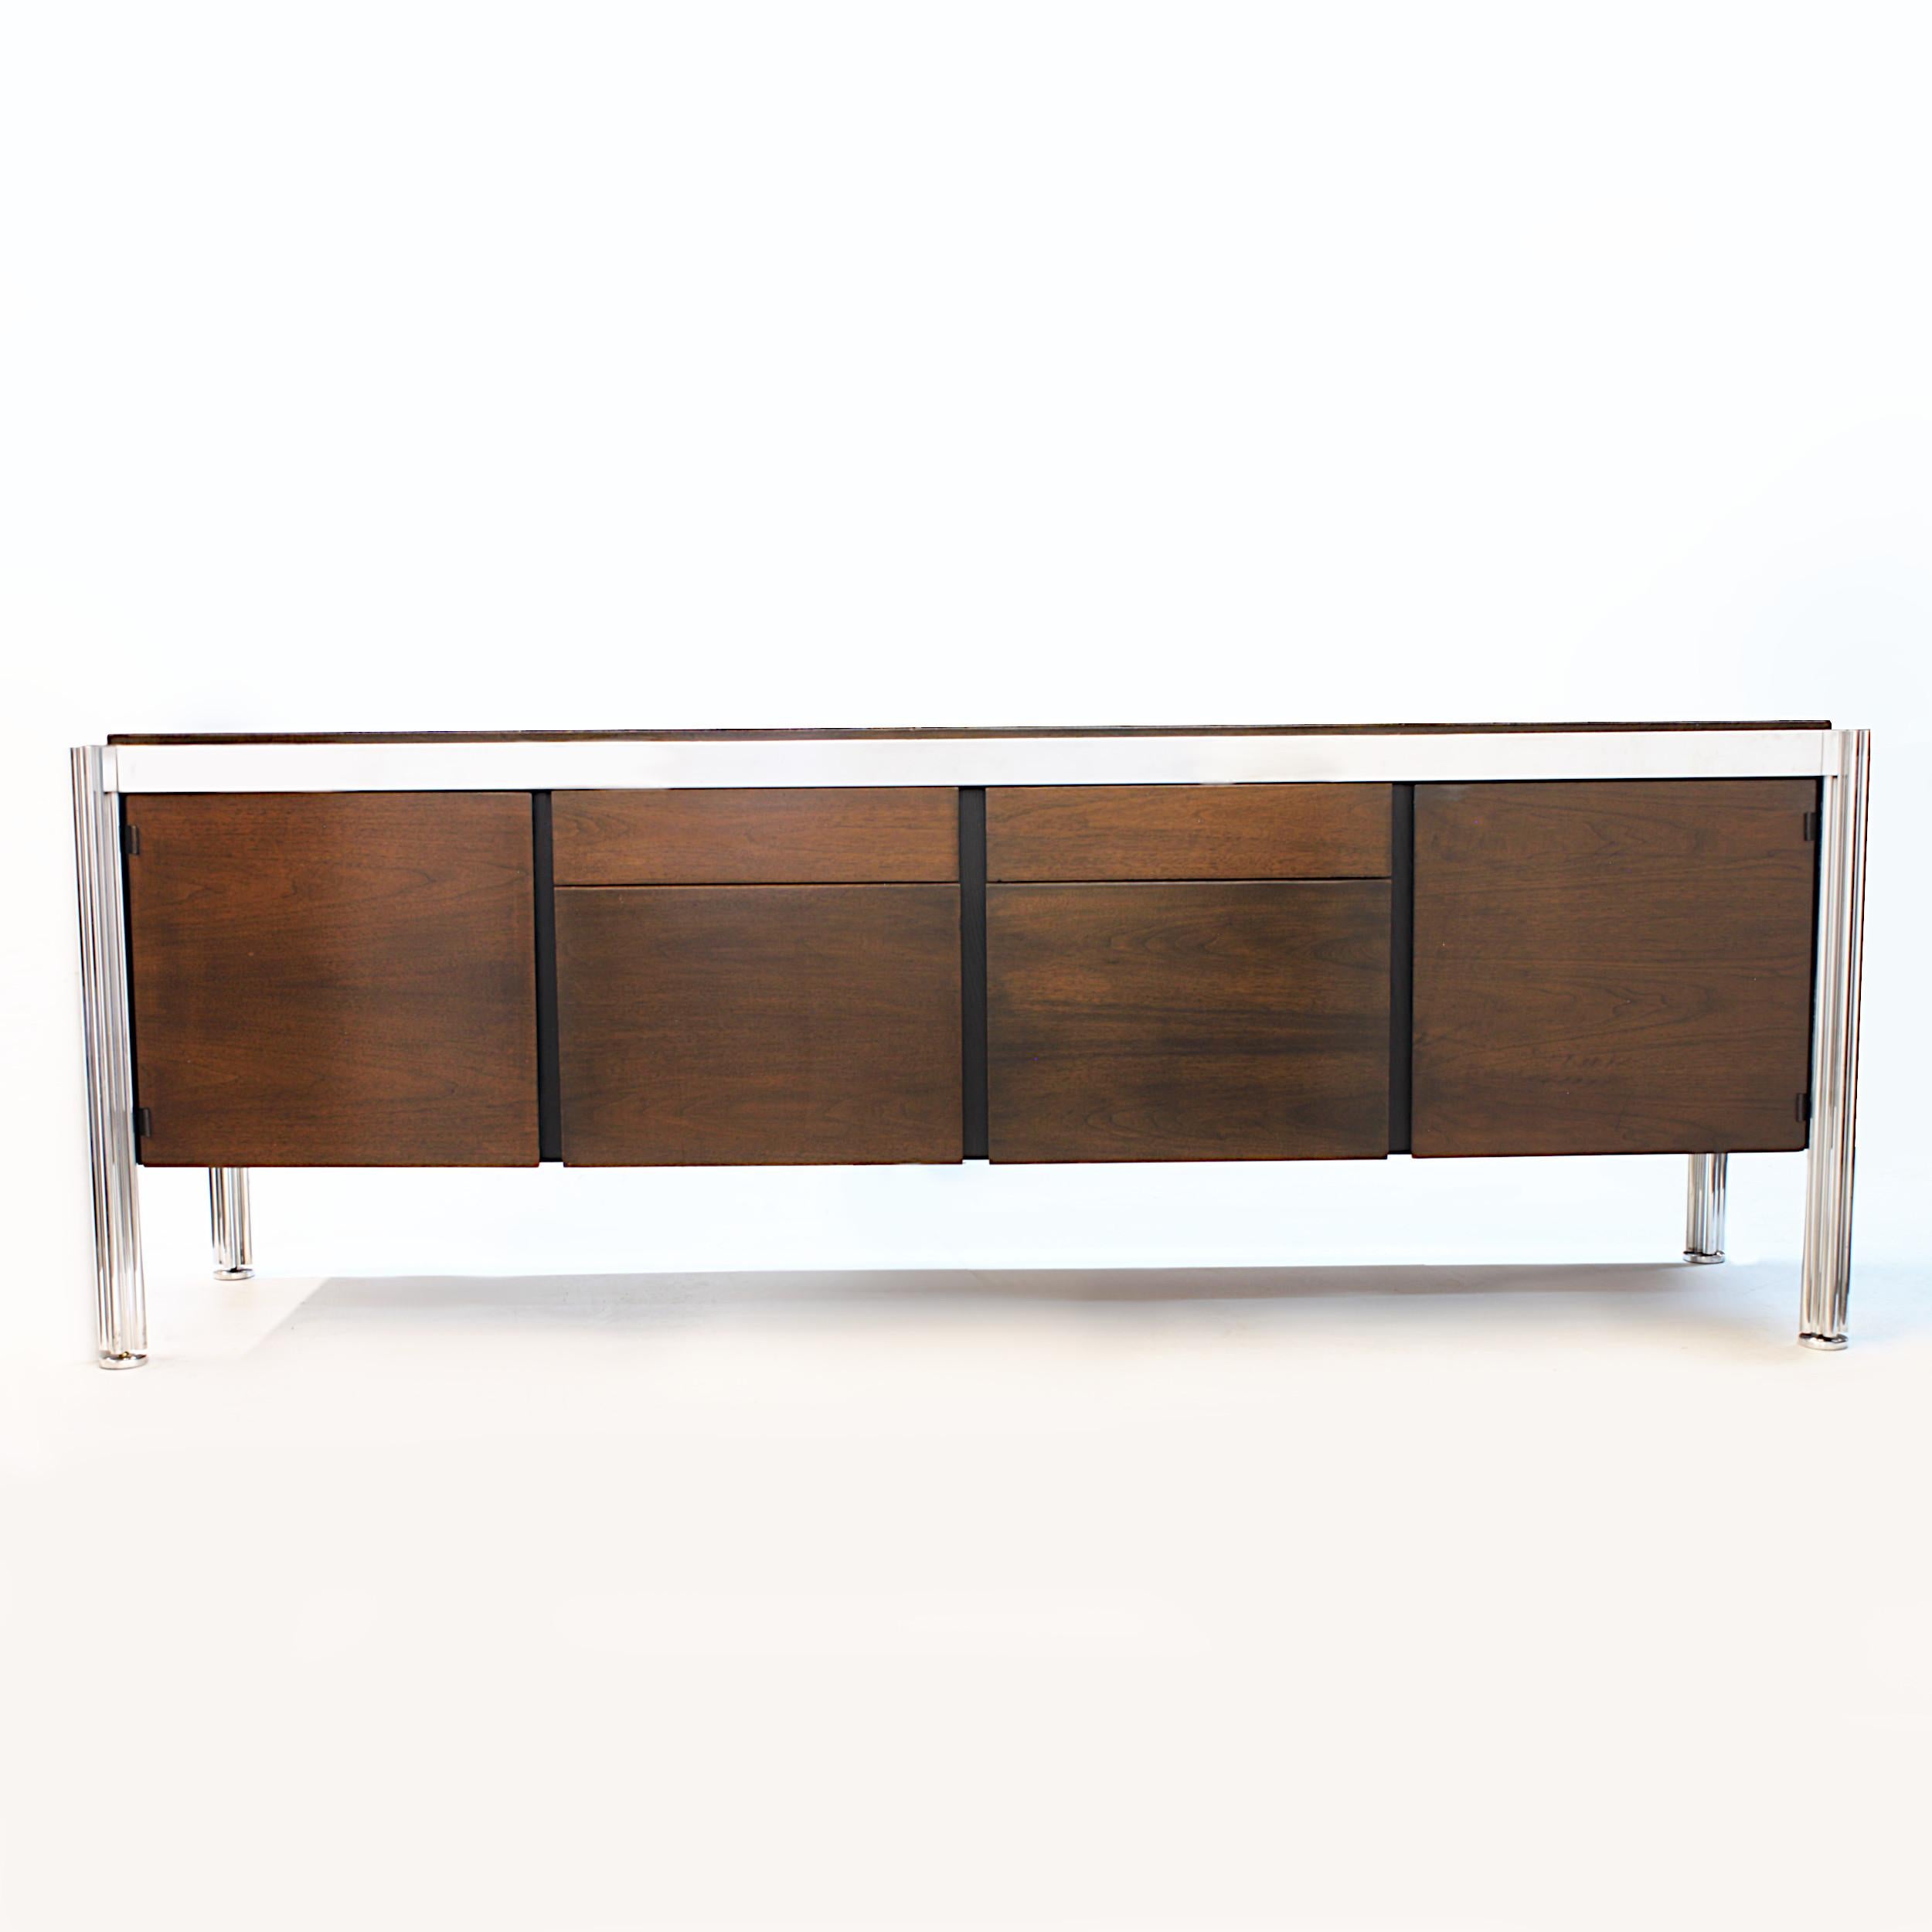 Amazing 1970s walnut and aluminum credenza designed by George Ciancimino for Jens Risom Furniture. Credenza features a sleek, Minimalist design, four center drawers, flanked by two single-door cabinets and unique puzzle-shaped aluminum legs. Would